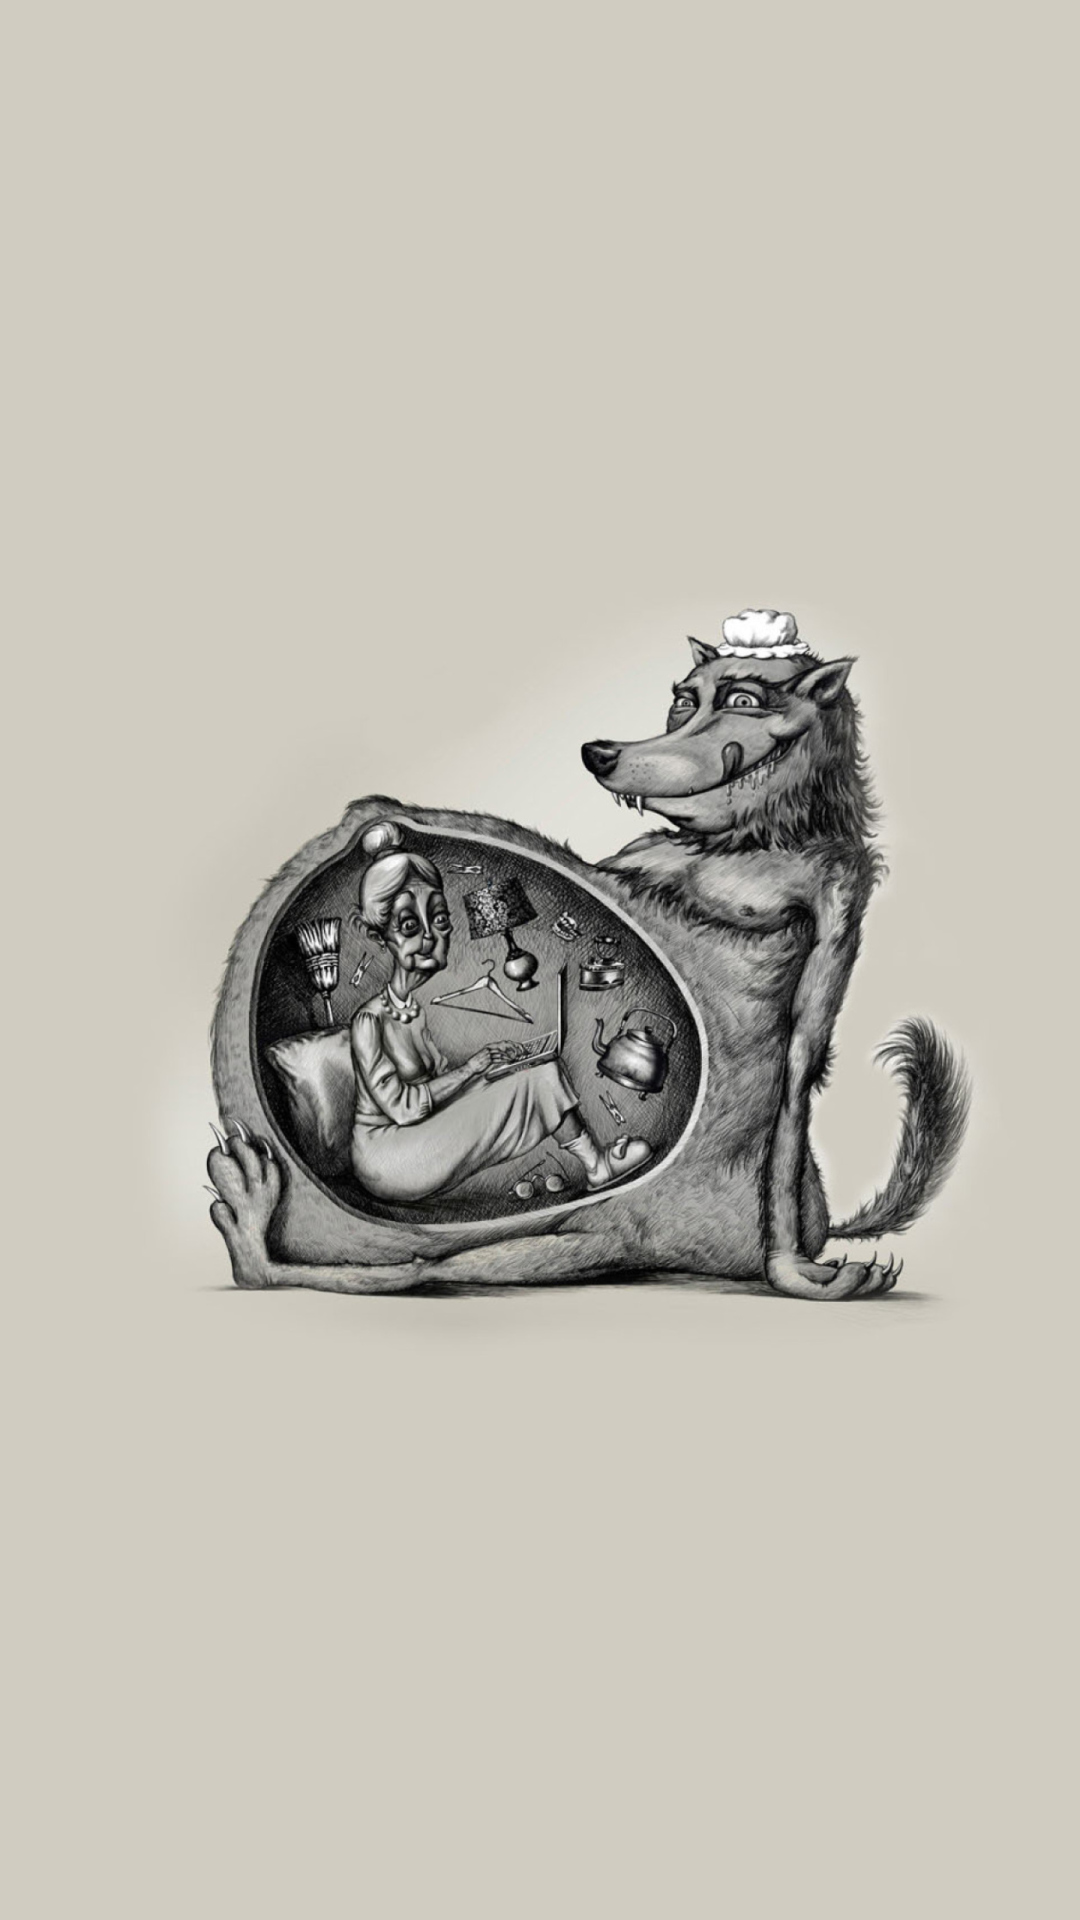 Little Red Riding Hood - Wolf And Granny screenshot #1 1080x1920